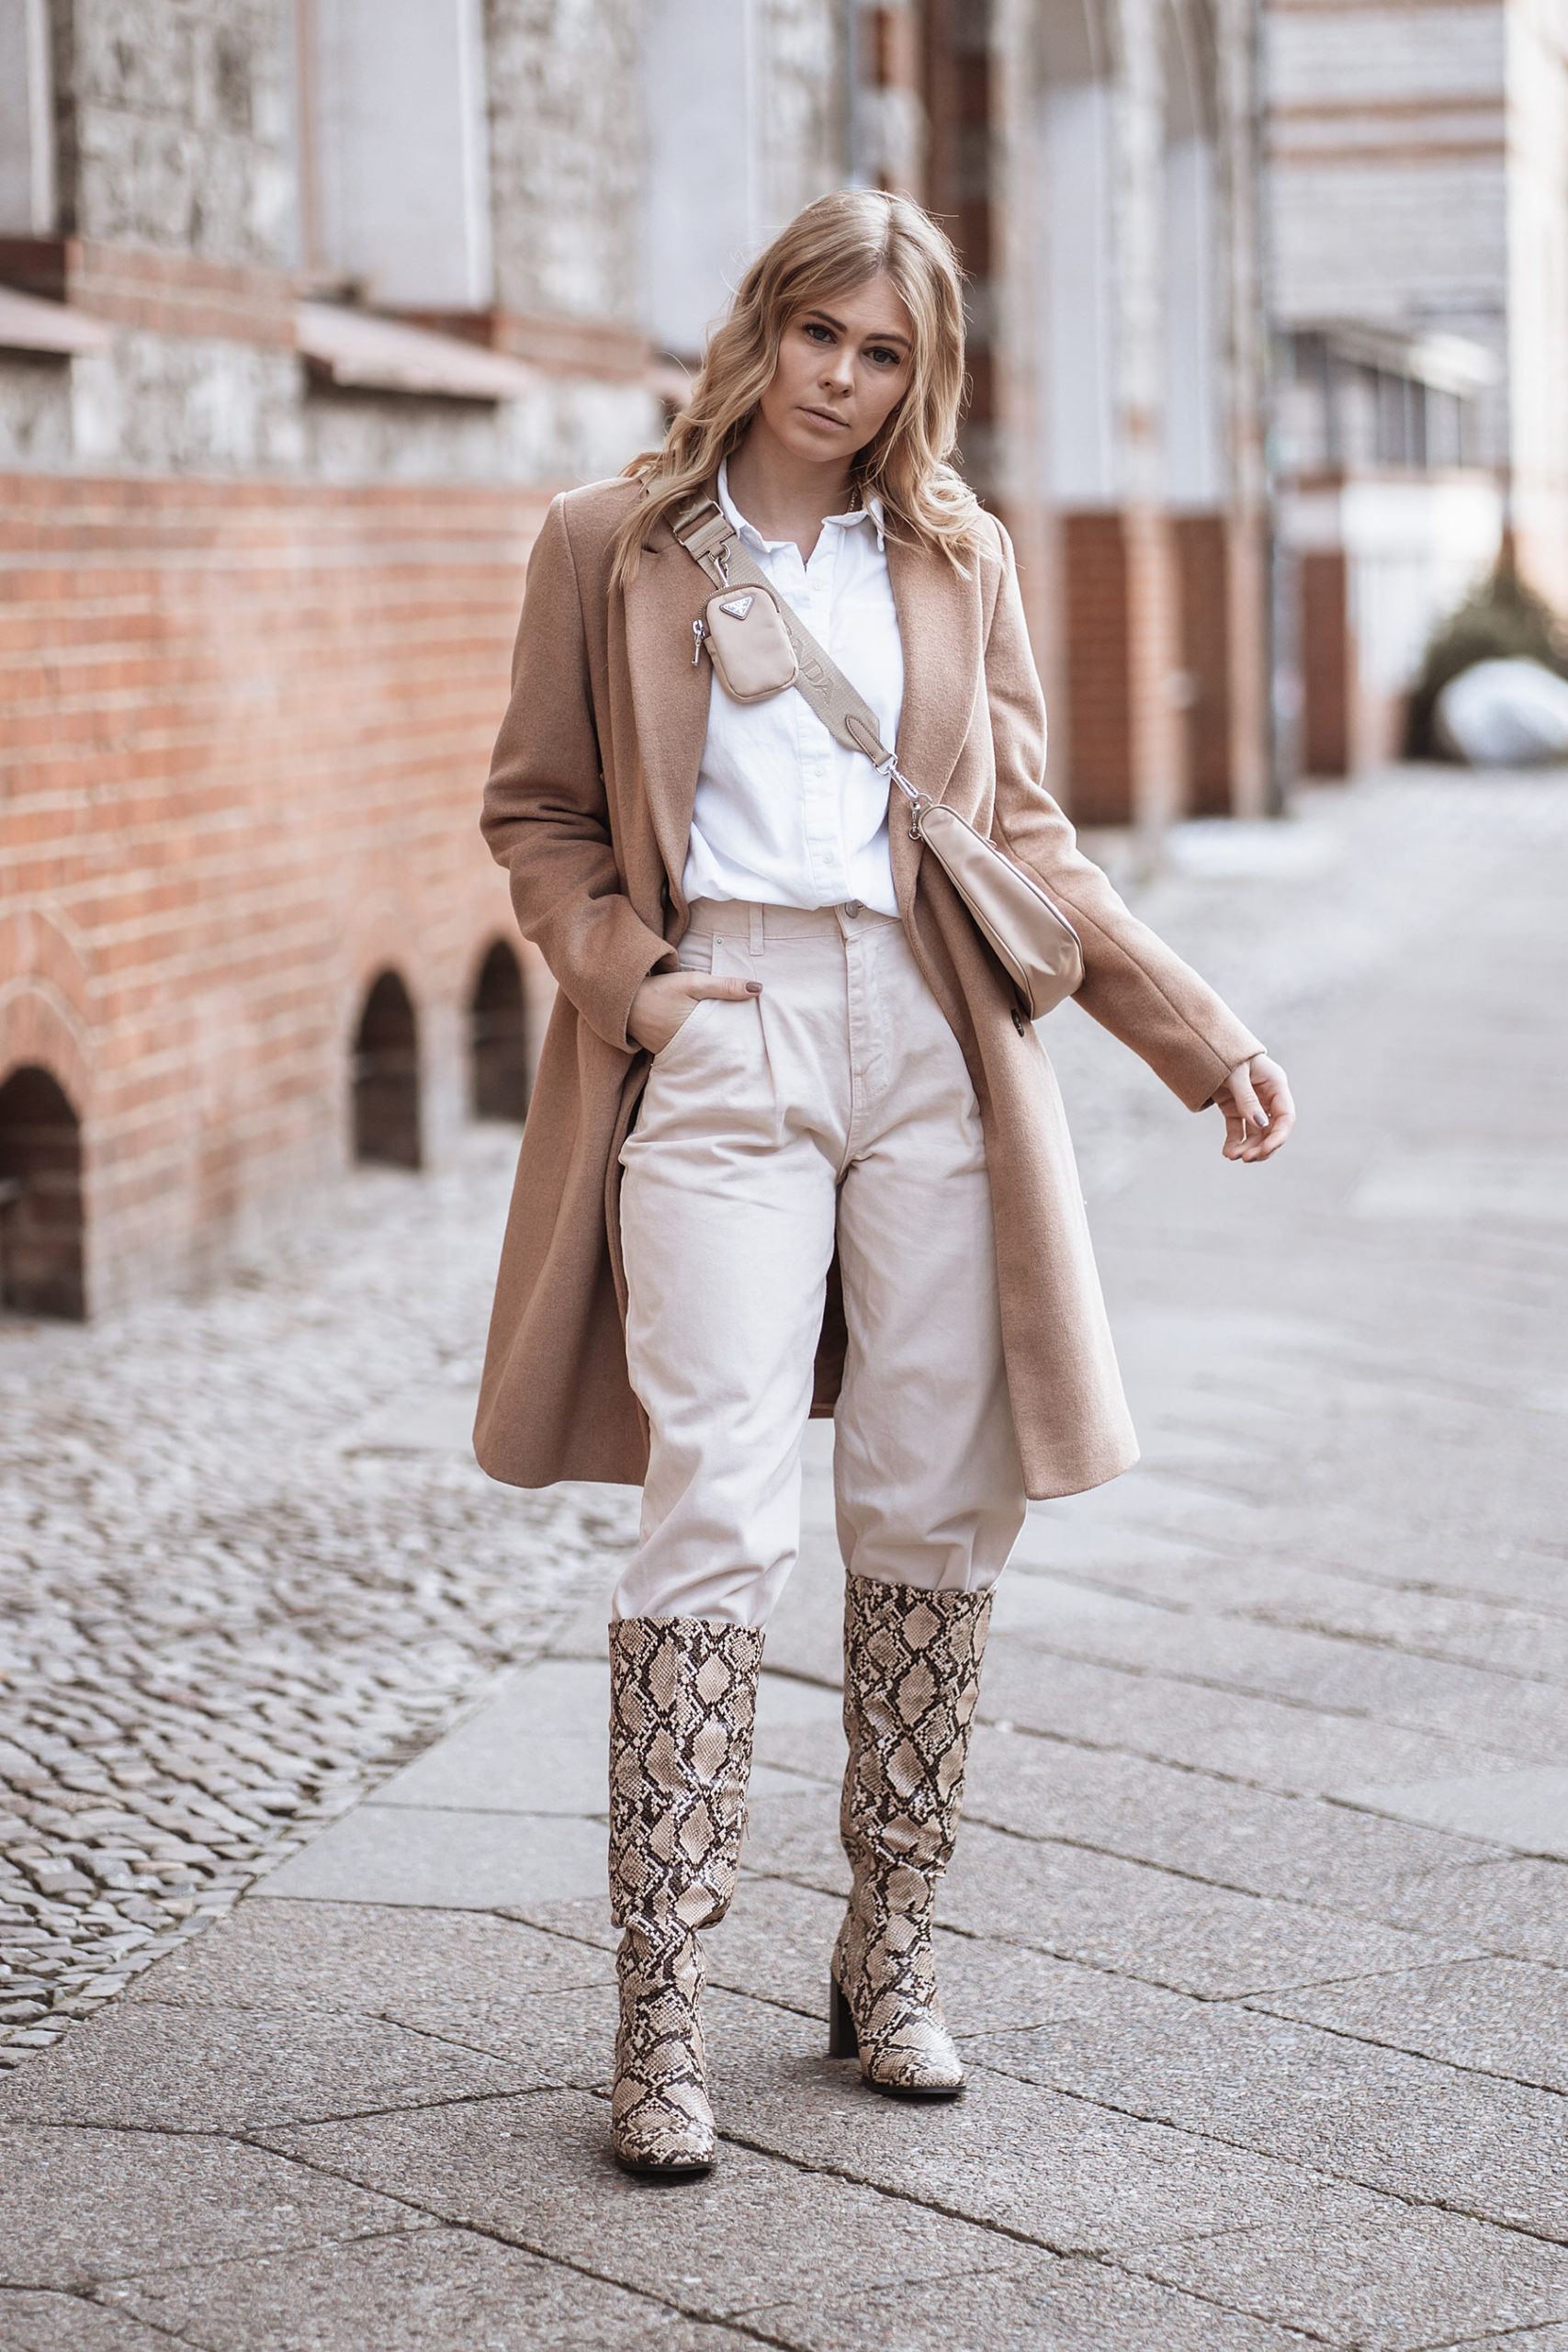 slouchy jeans snakeboots outfit fashion week berlin inga brauer